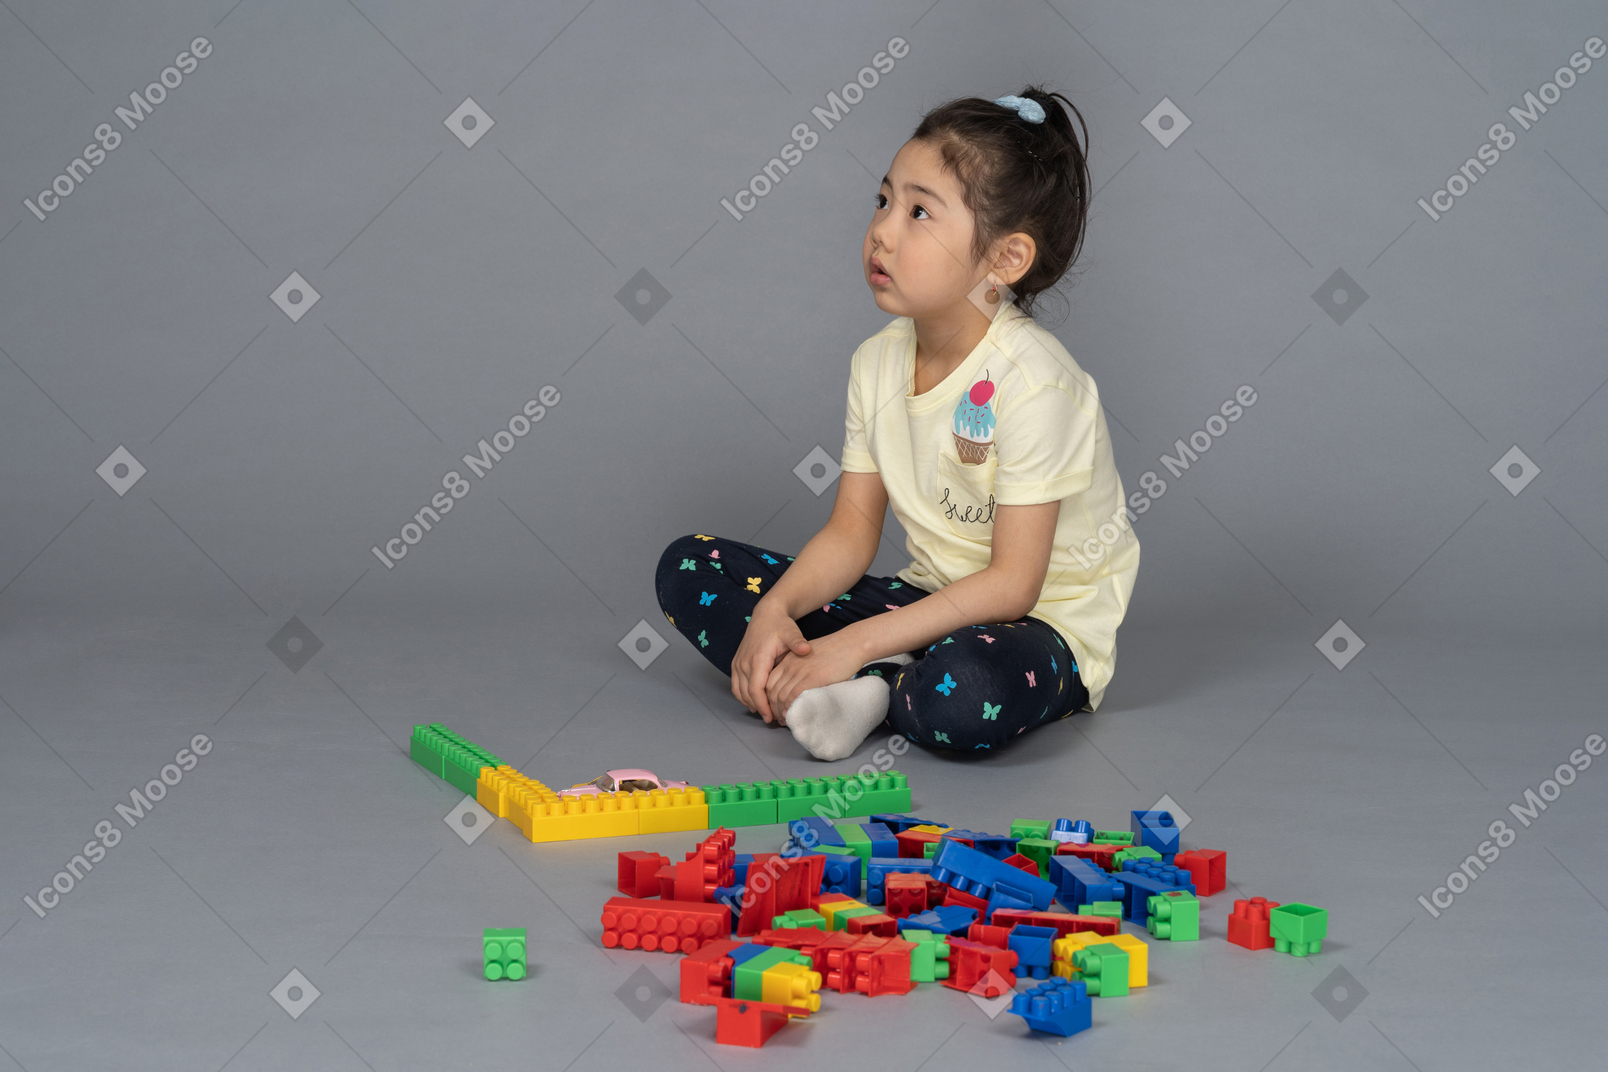 Side view of a little girl sitting beside a building set